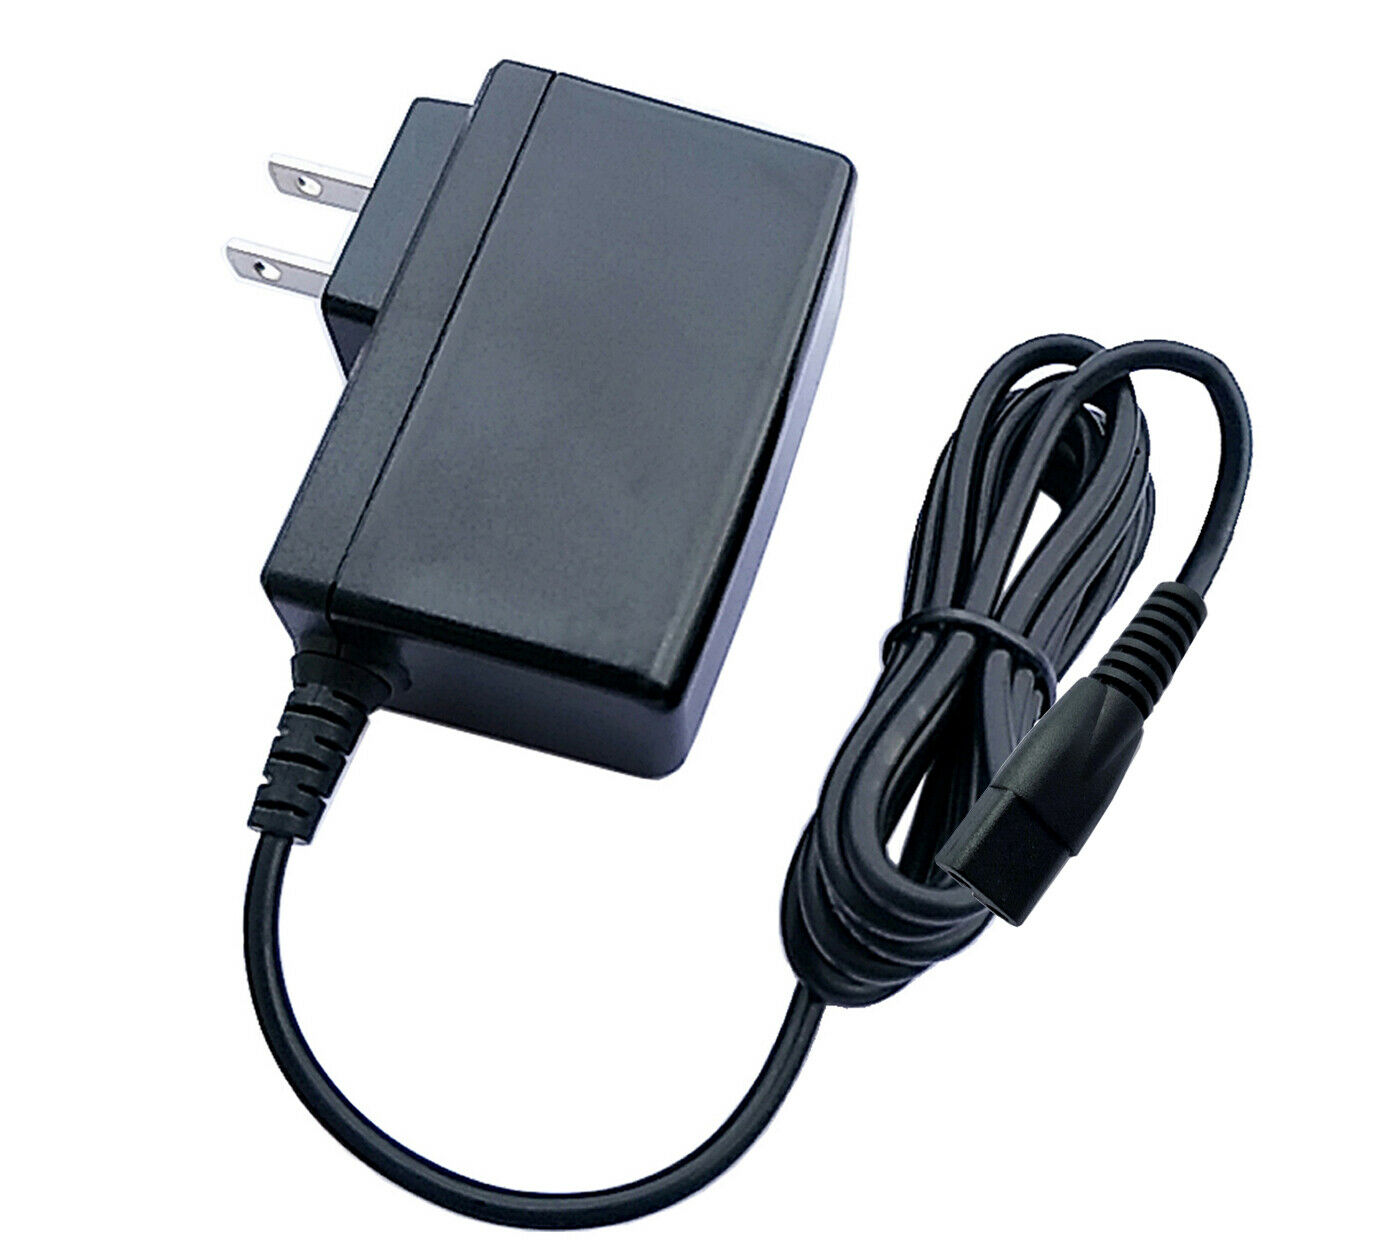 New AC/DC Adapter For Logitech MX700 Cordless Optical Mouse Power Supply Charger Technical Specifications: 1 AC input v